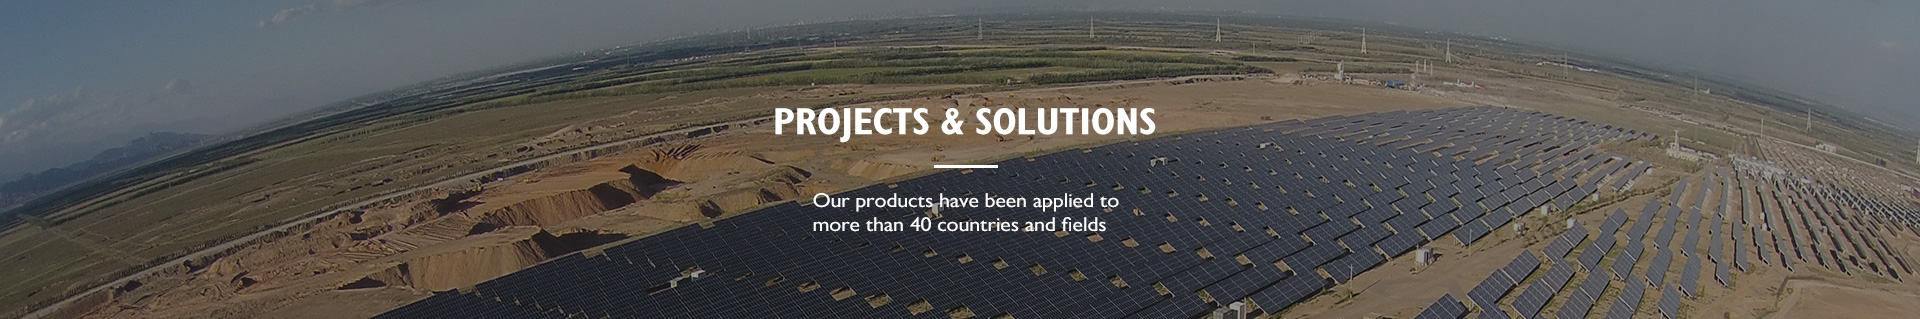 Projects & Solutions